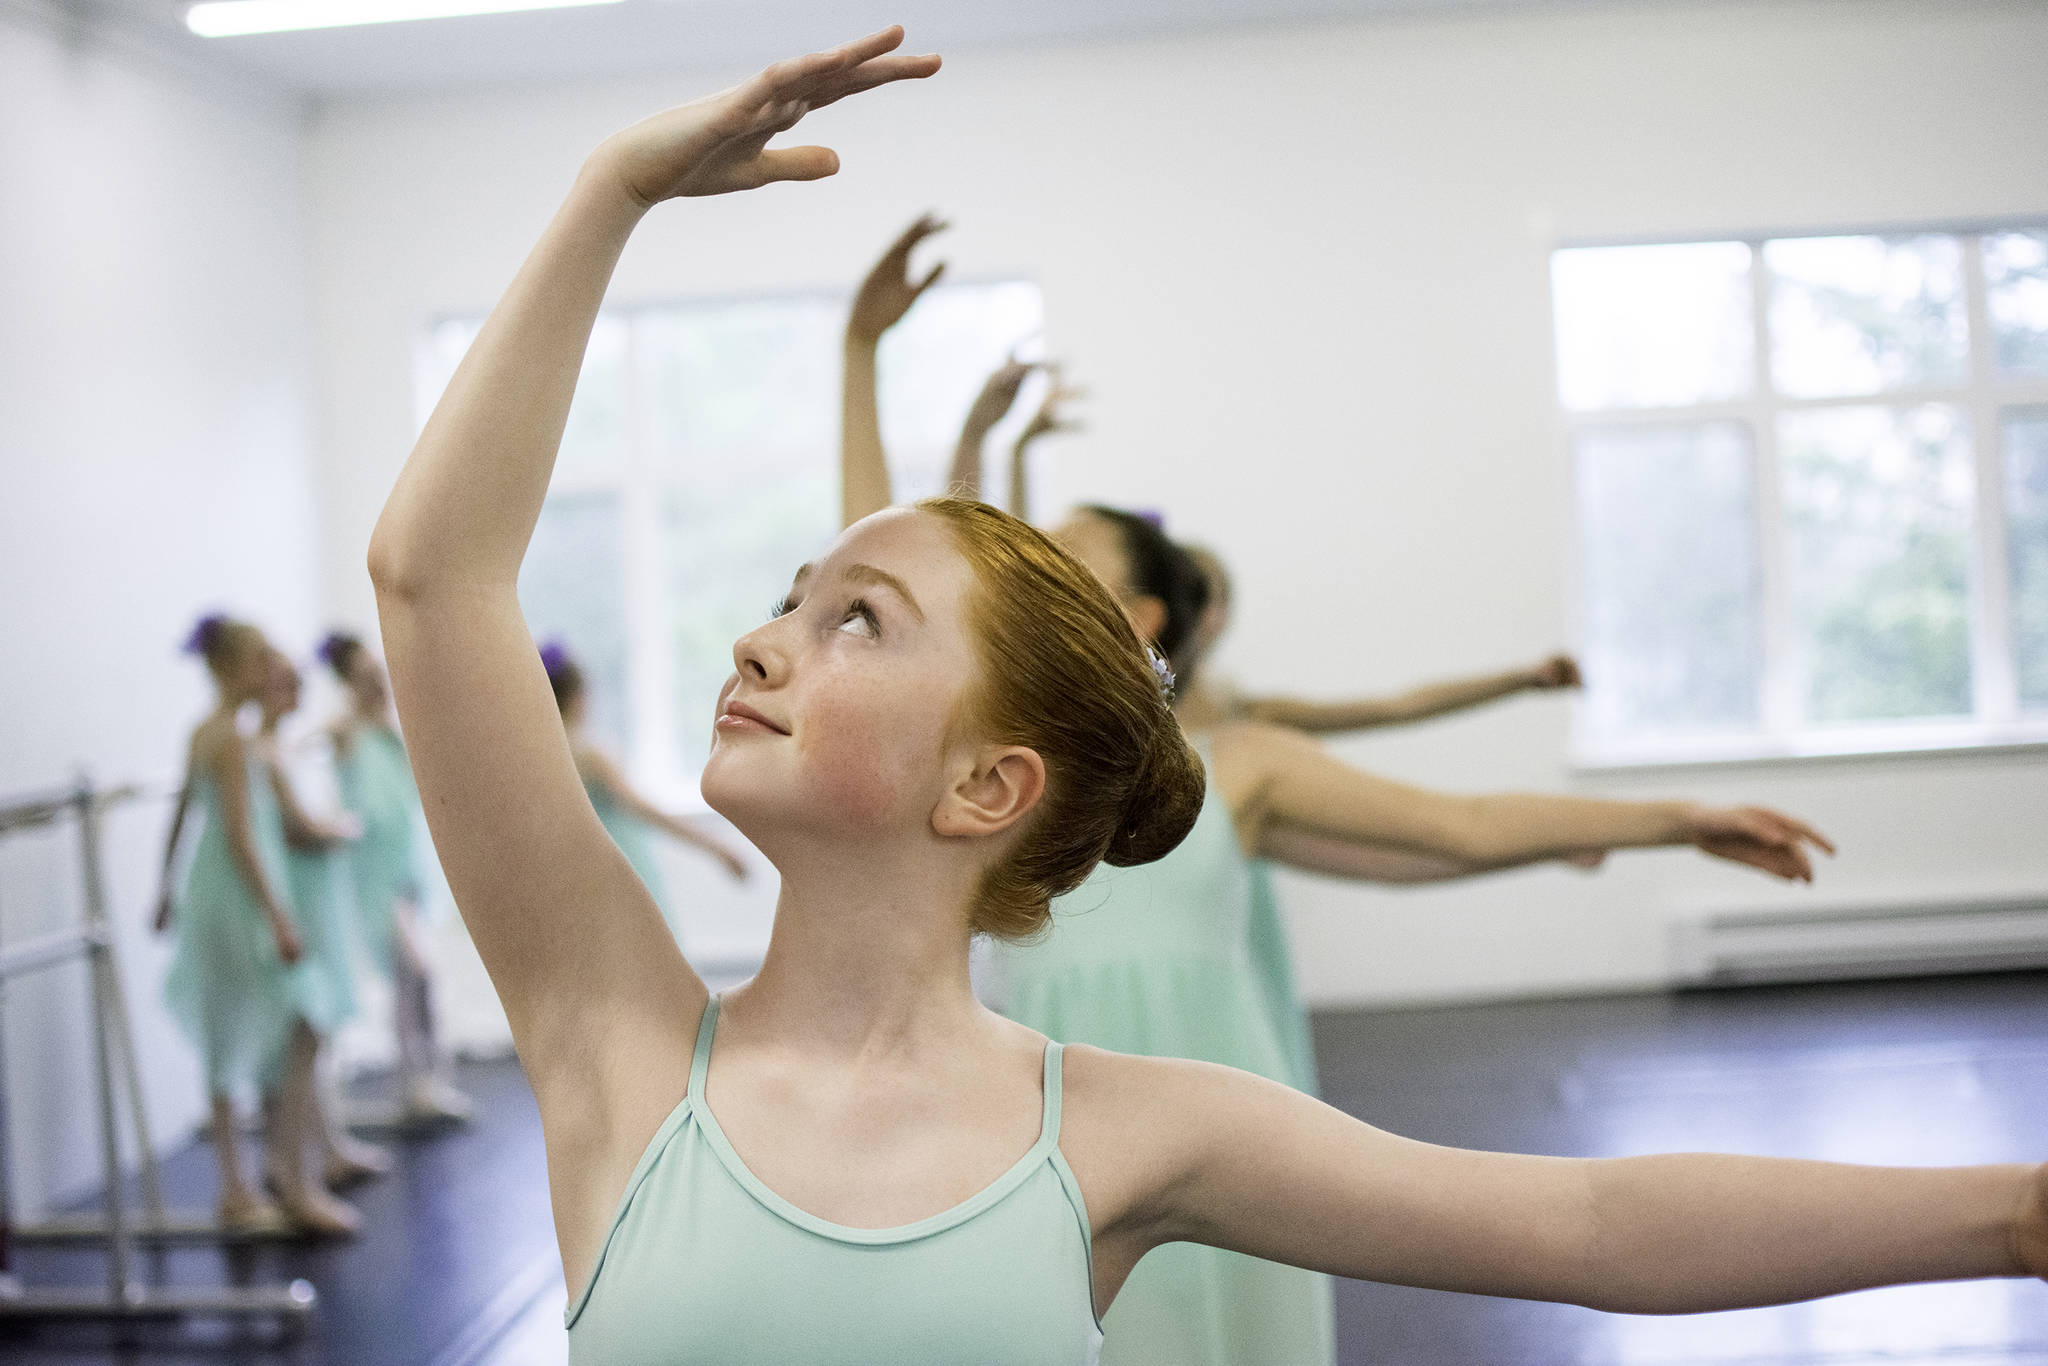 Georgia Post rehearses “Springtime Dances” at the Juneau Dance Theatre on Sunday, April 22, 2018. Richard McGrail | For the Capital City Weekly